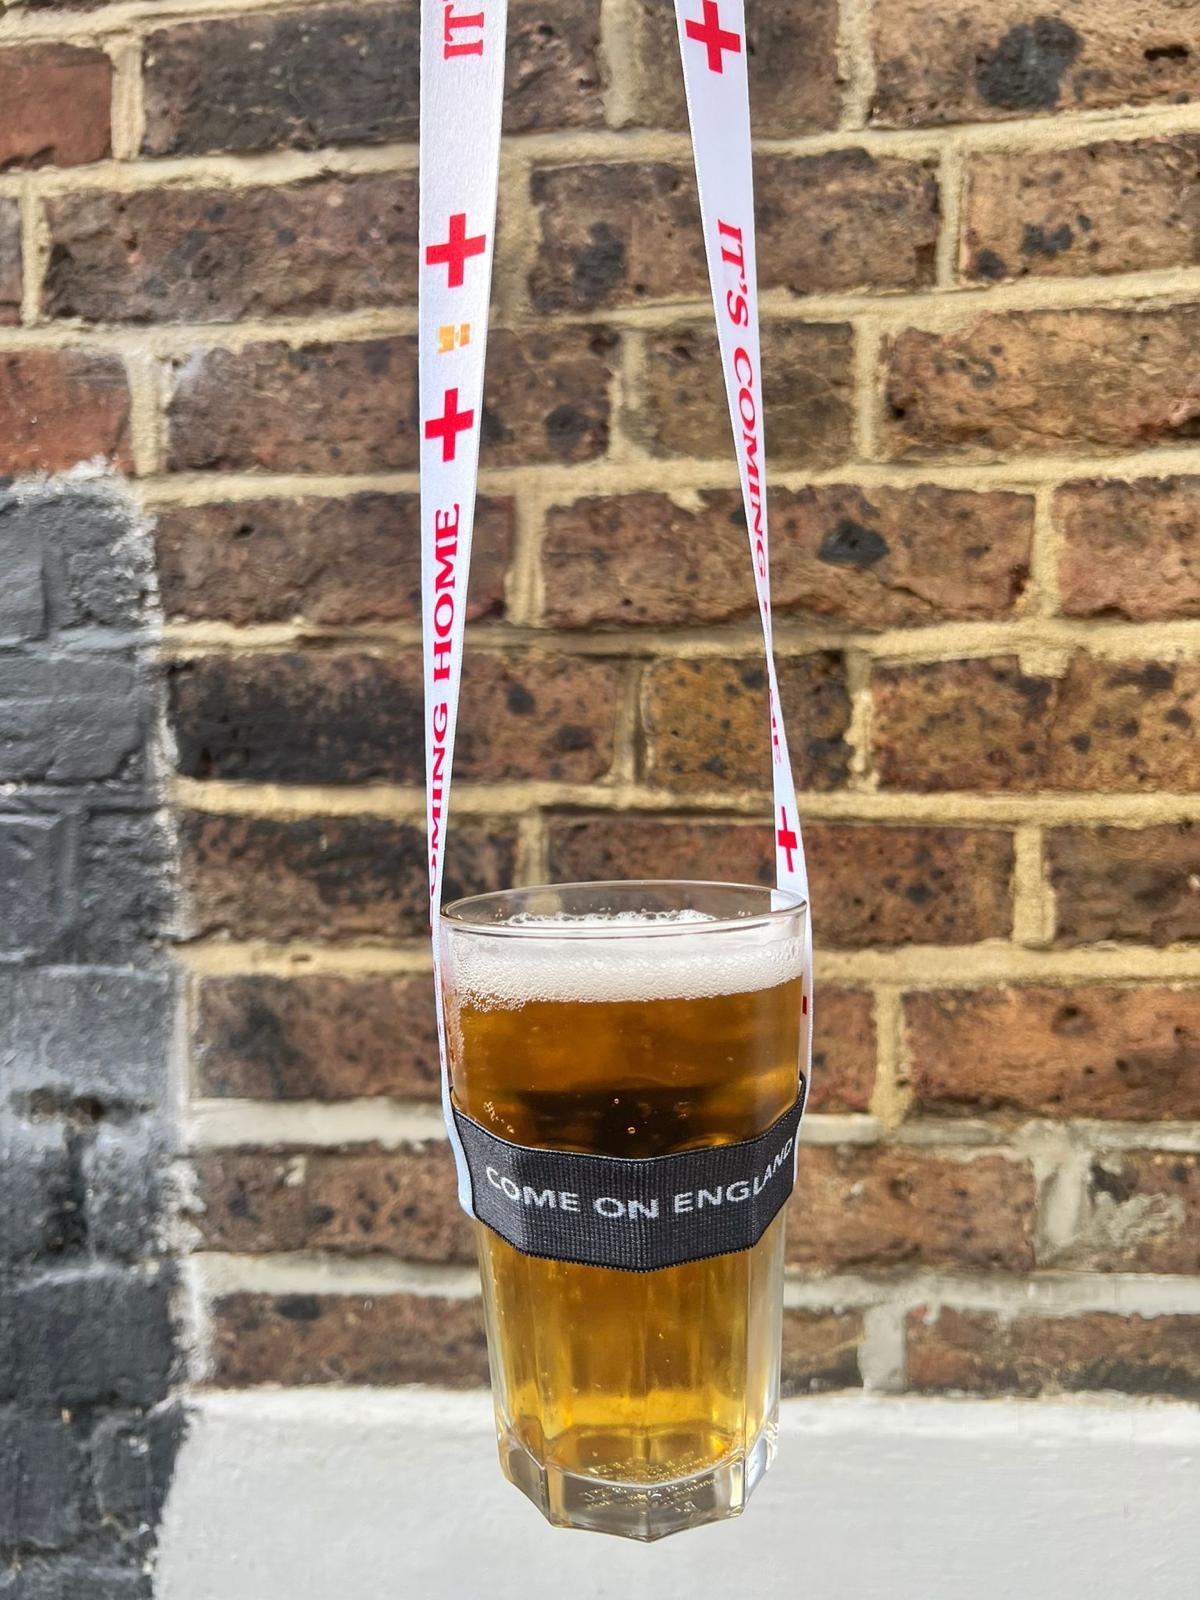 England Limited Edition Beer Lanyards X 4 Pack - #shop_name - #BeerLanyard